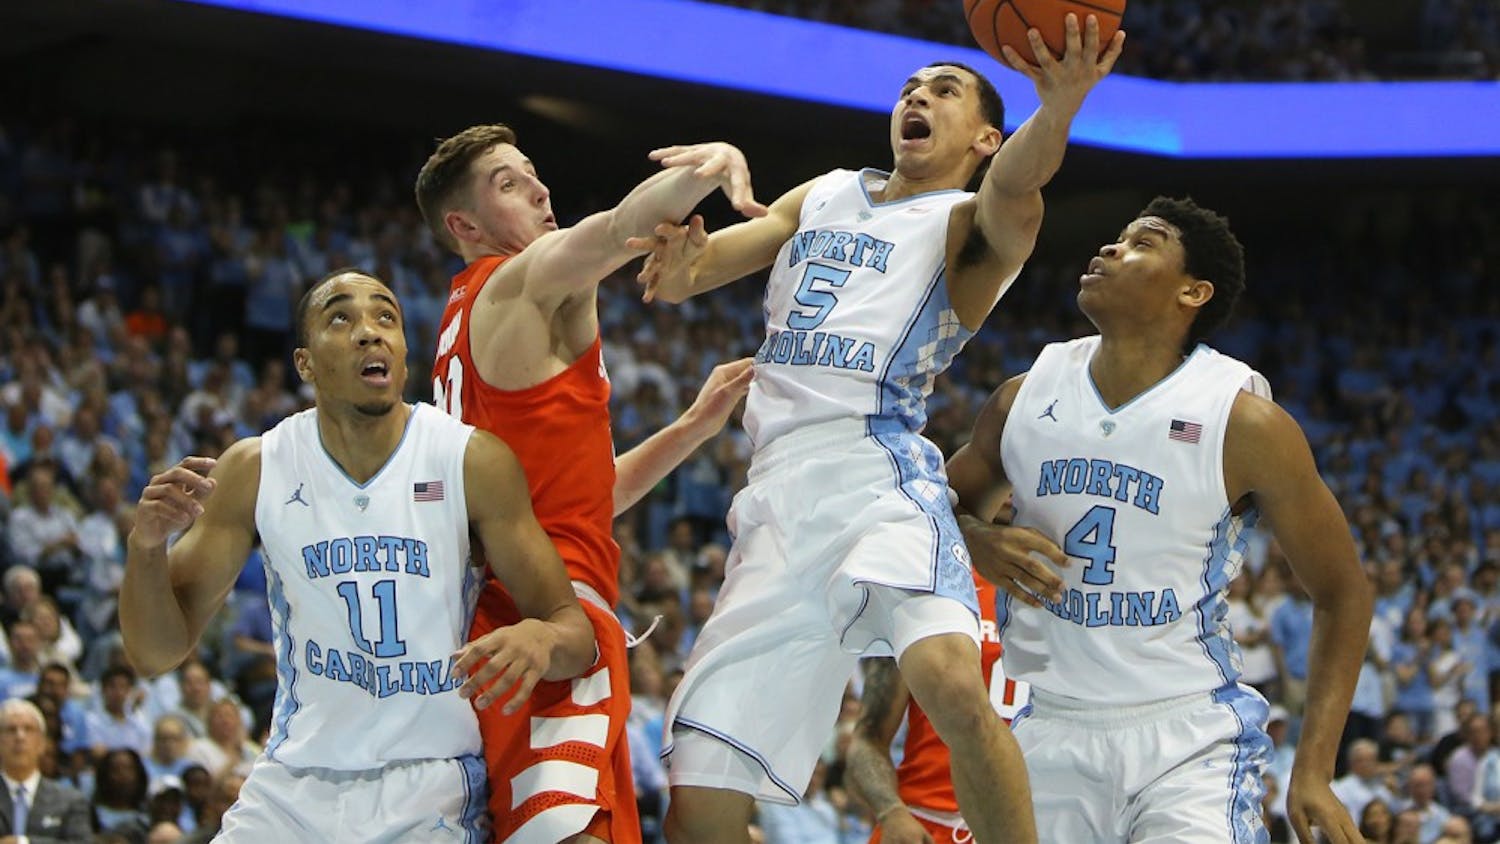 Senior Marcus Paige (5) goes up for a layup during Monday night’s home game.